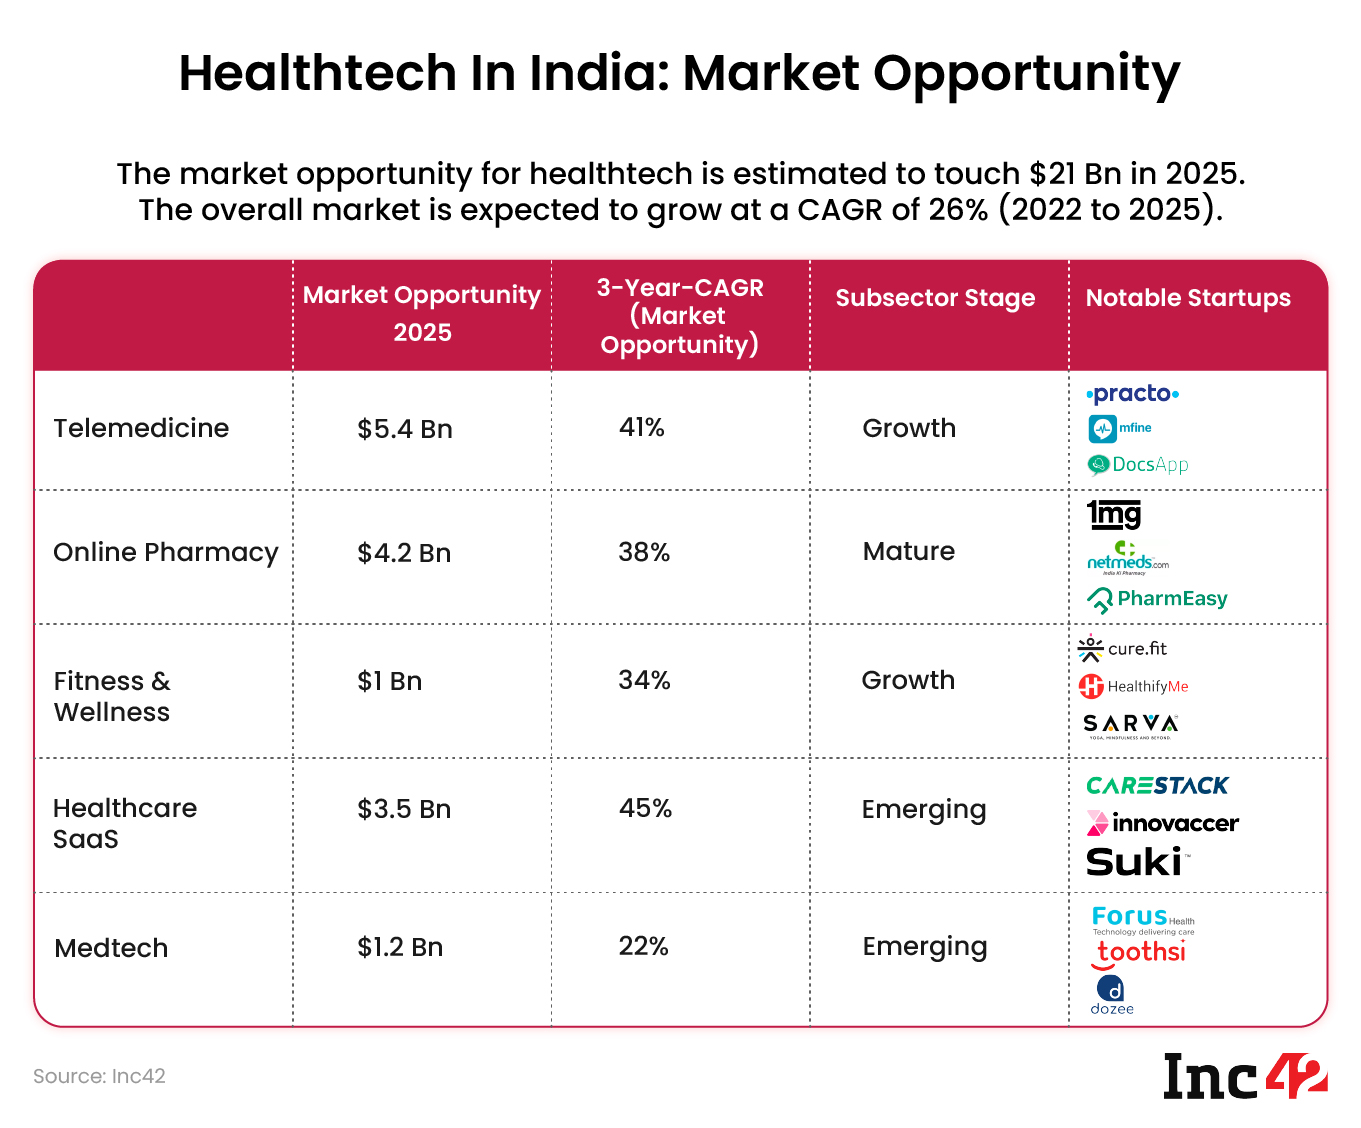 healthcare SaaS to become the fastest growing healthtech sector